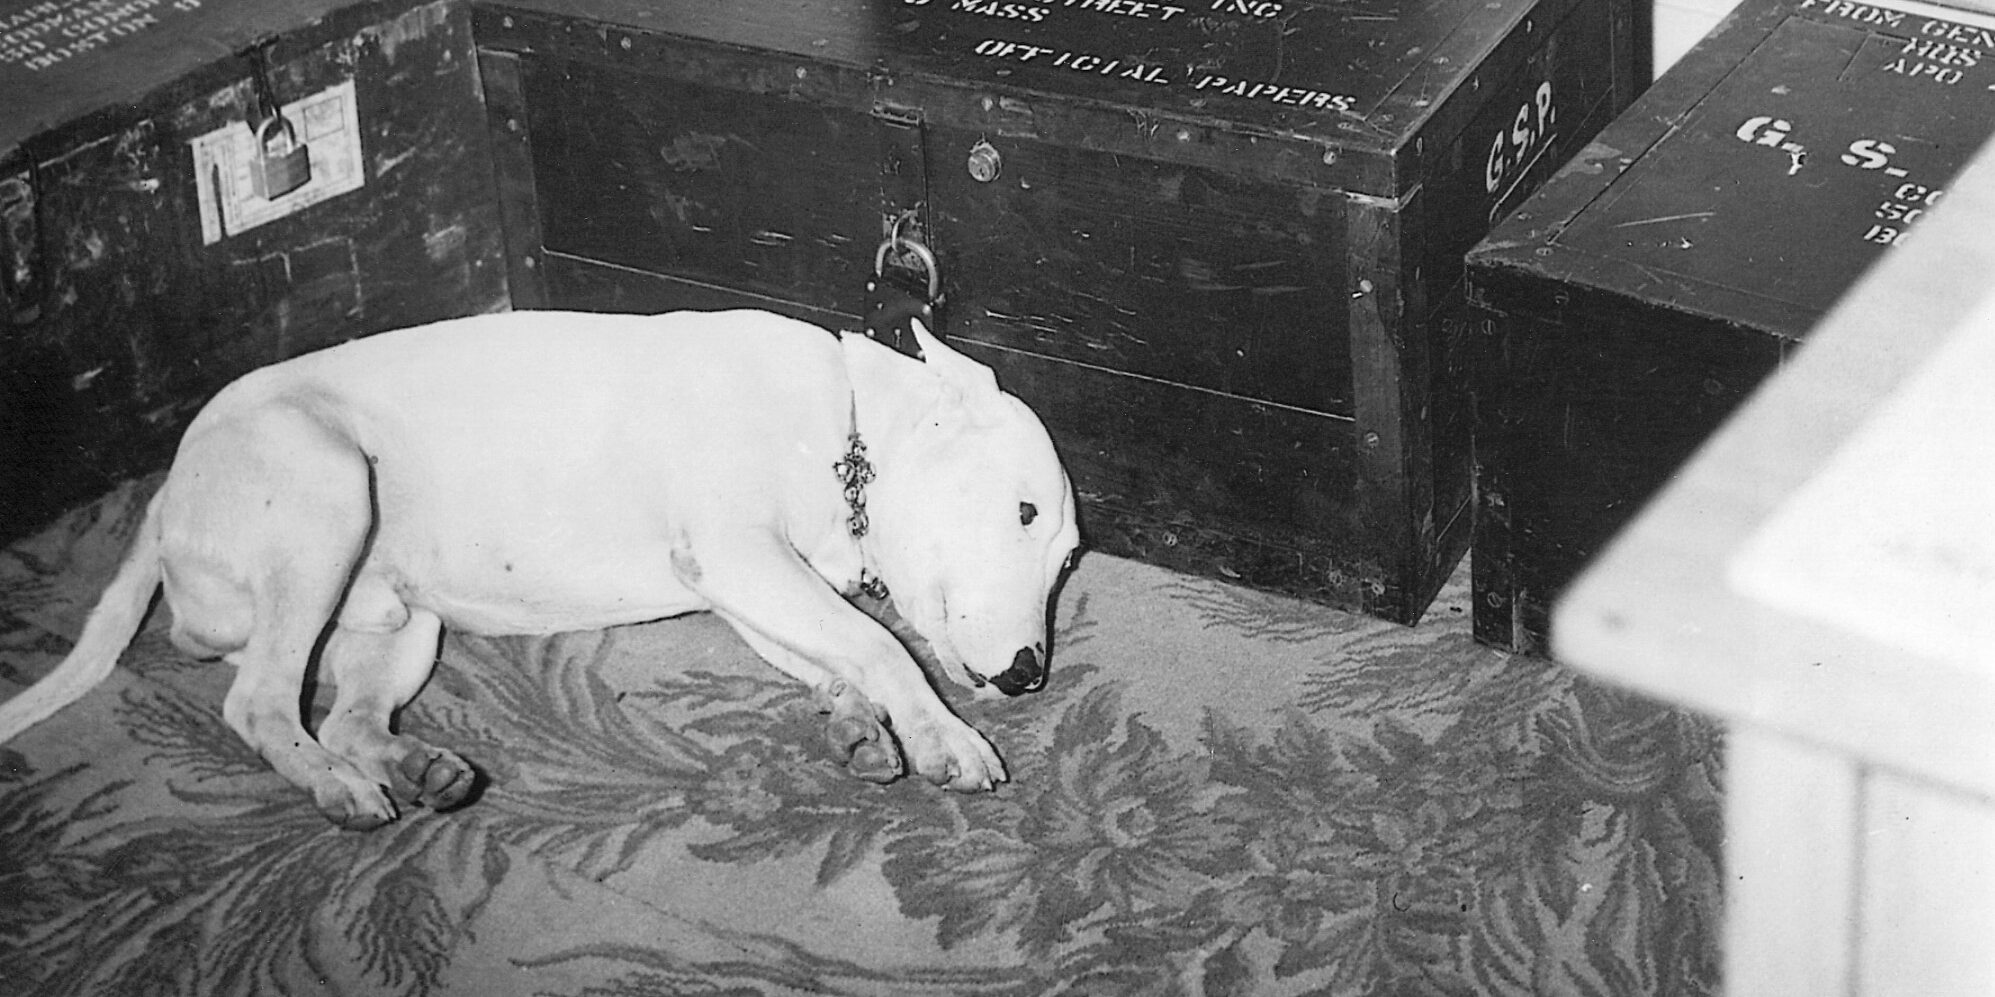 George S. Patton’s bull terrier Wille waits quietly for his late master to return.